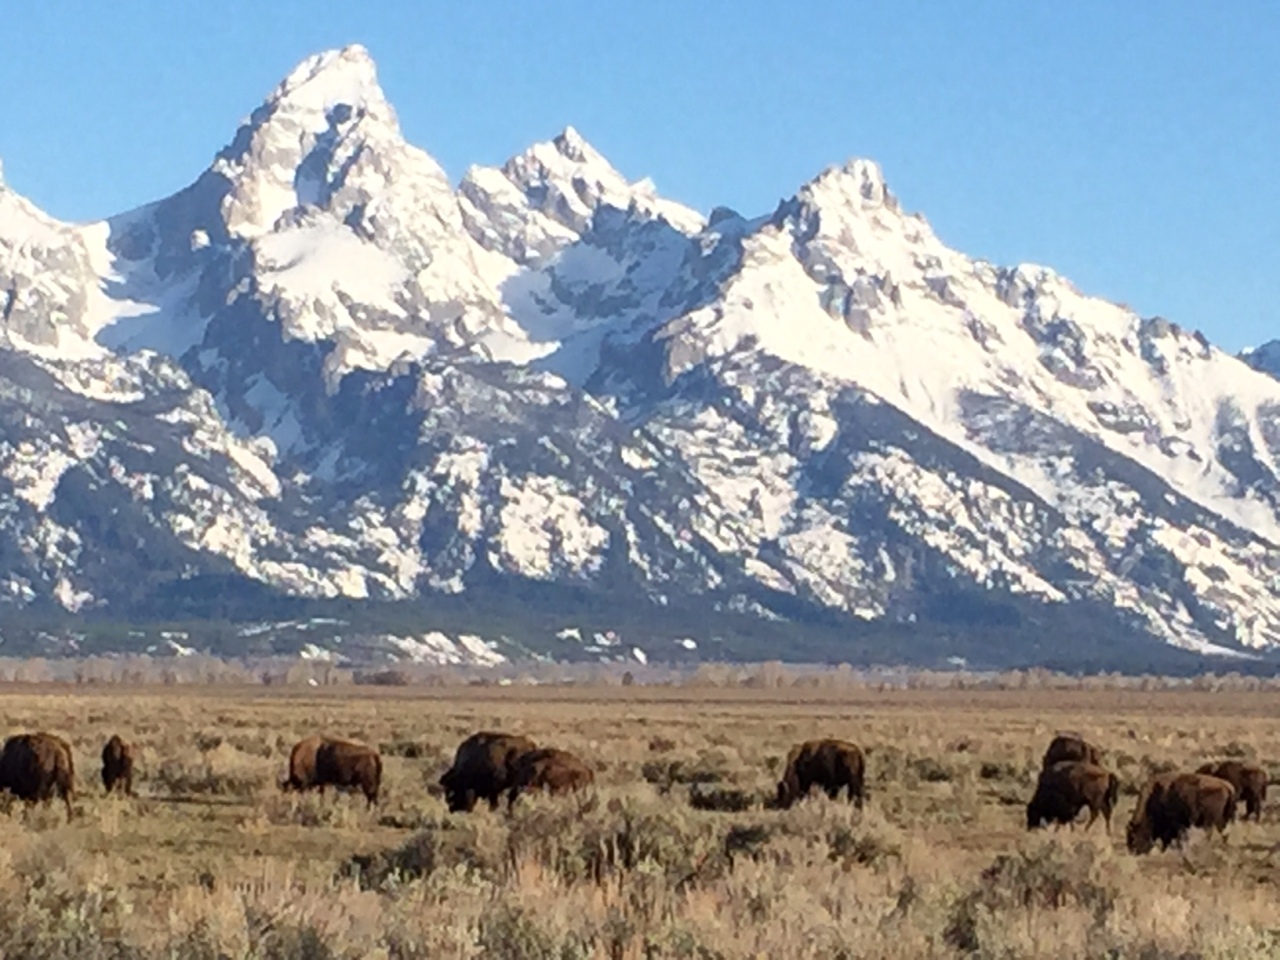 Jackson Hole, Wyoming – moose, bison and bears – oh my!